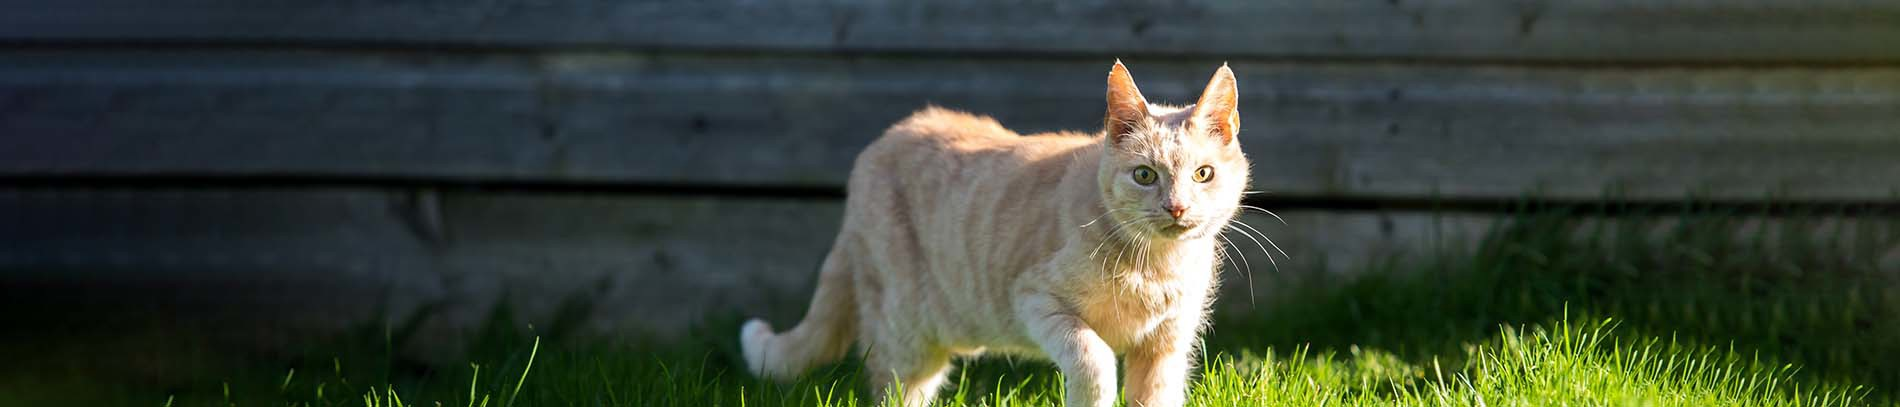 Farm cats and rural homing